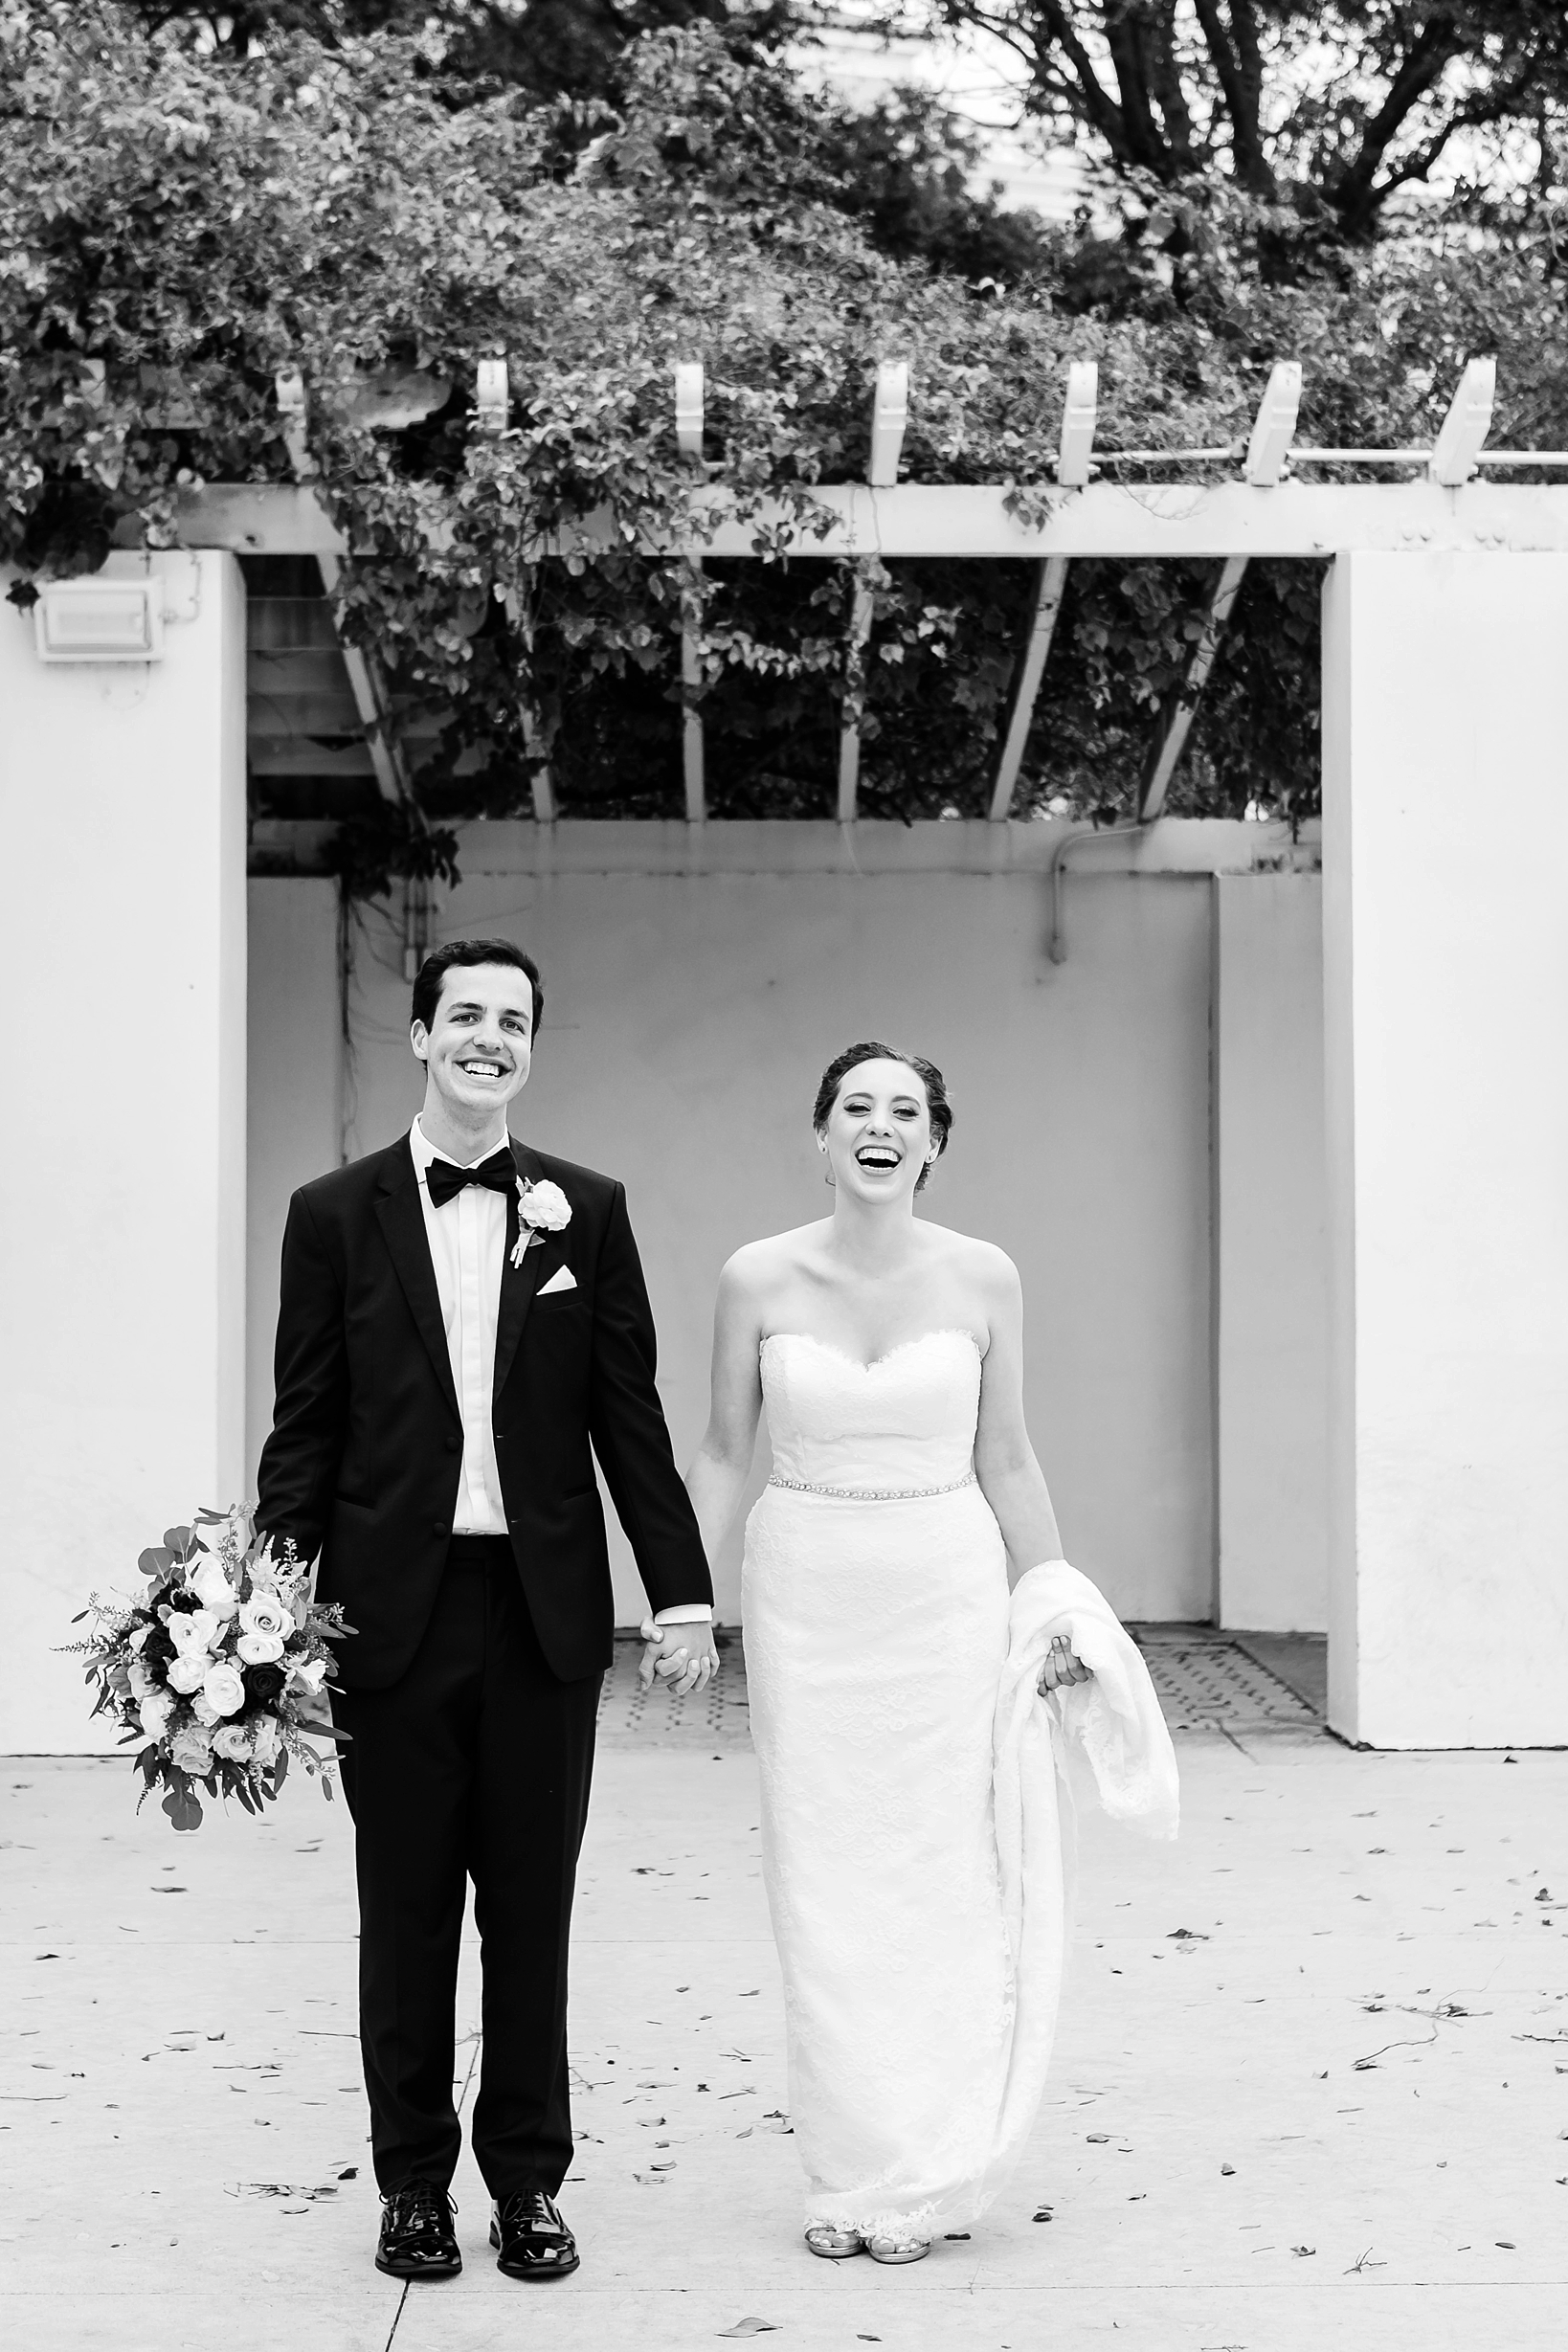 A classic black and white photo of the wedding couple laughing on their special day by Sarah & Ben Photography